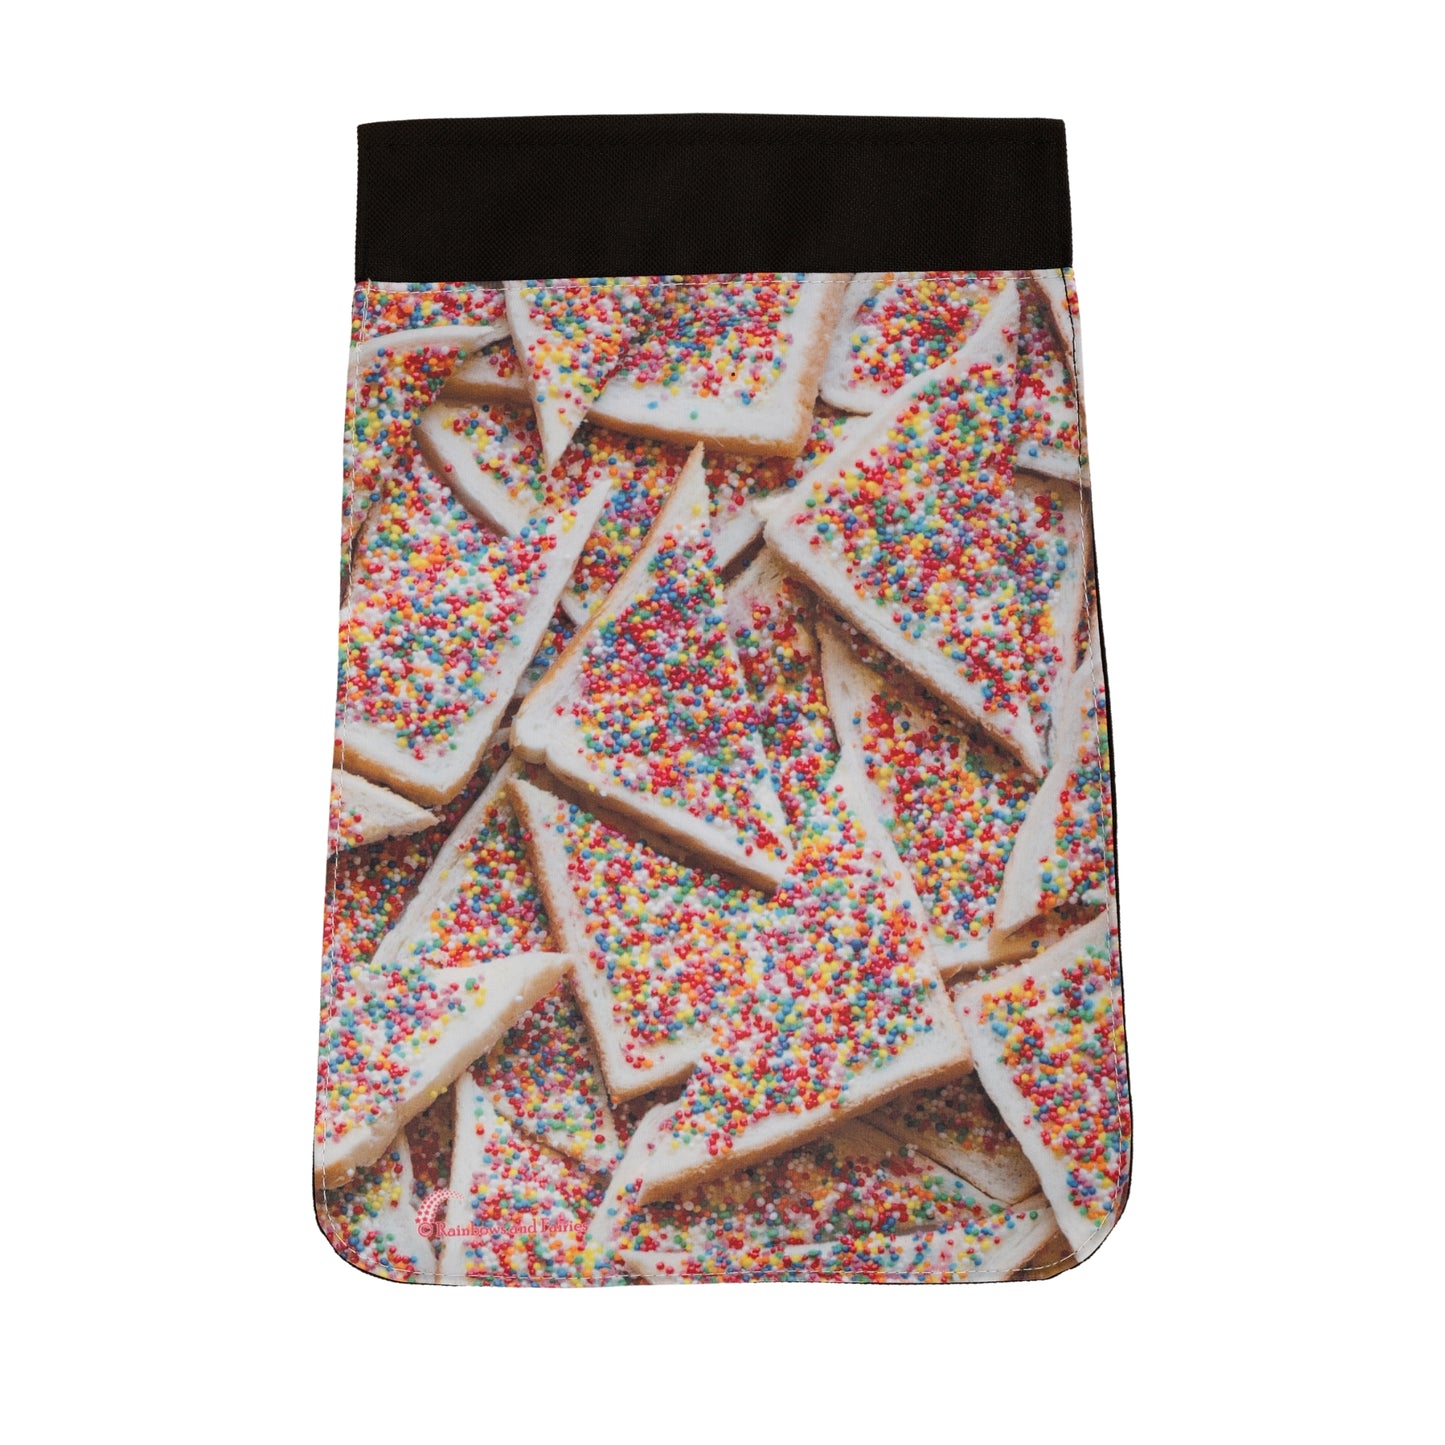 Sprinkles Cover Only by RainbowsAndFairies.com.au (Fairy Bread - 100s & 1000s - Party Food - Satchel Bag - Interchangeable Cover - Handbag) - SKU: BG_COVER_SPRNK_ORG - Pic-01